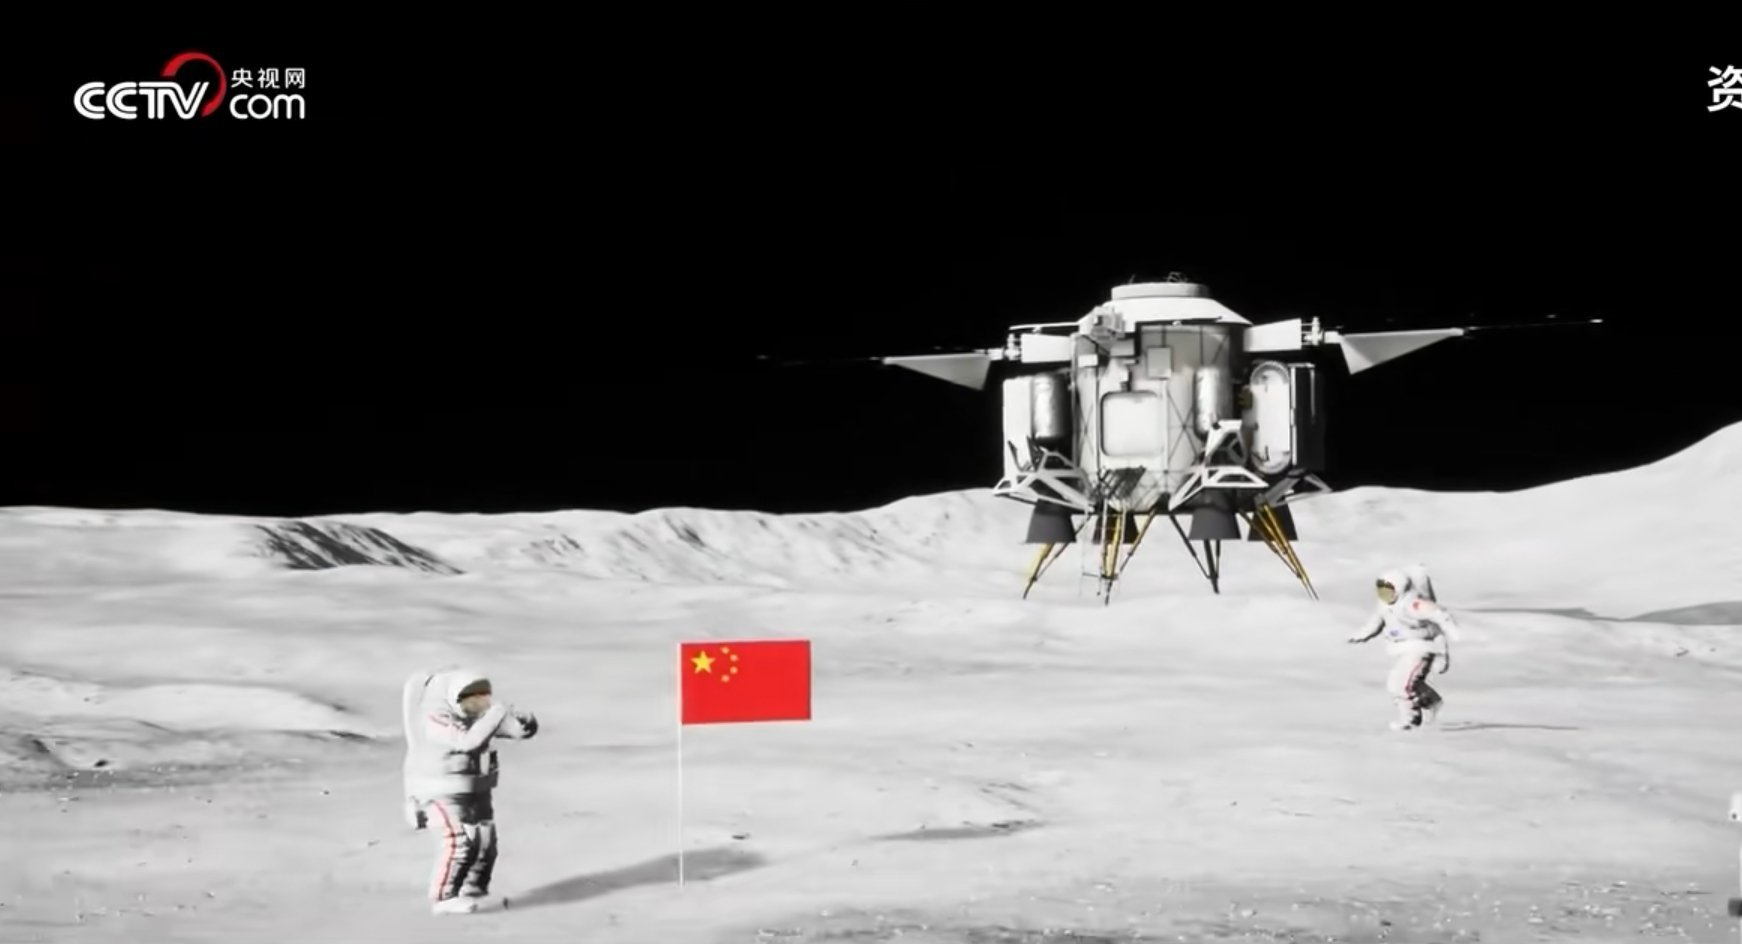 NASA chief says US ‘better watch out’ for China’s moon goals